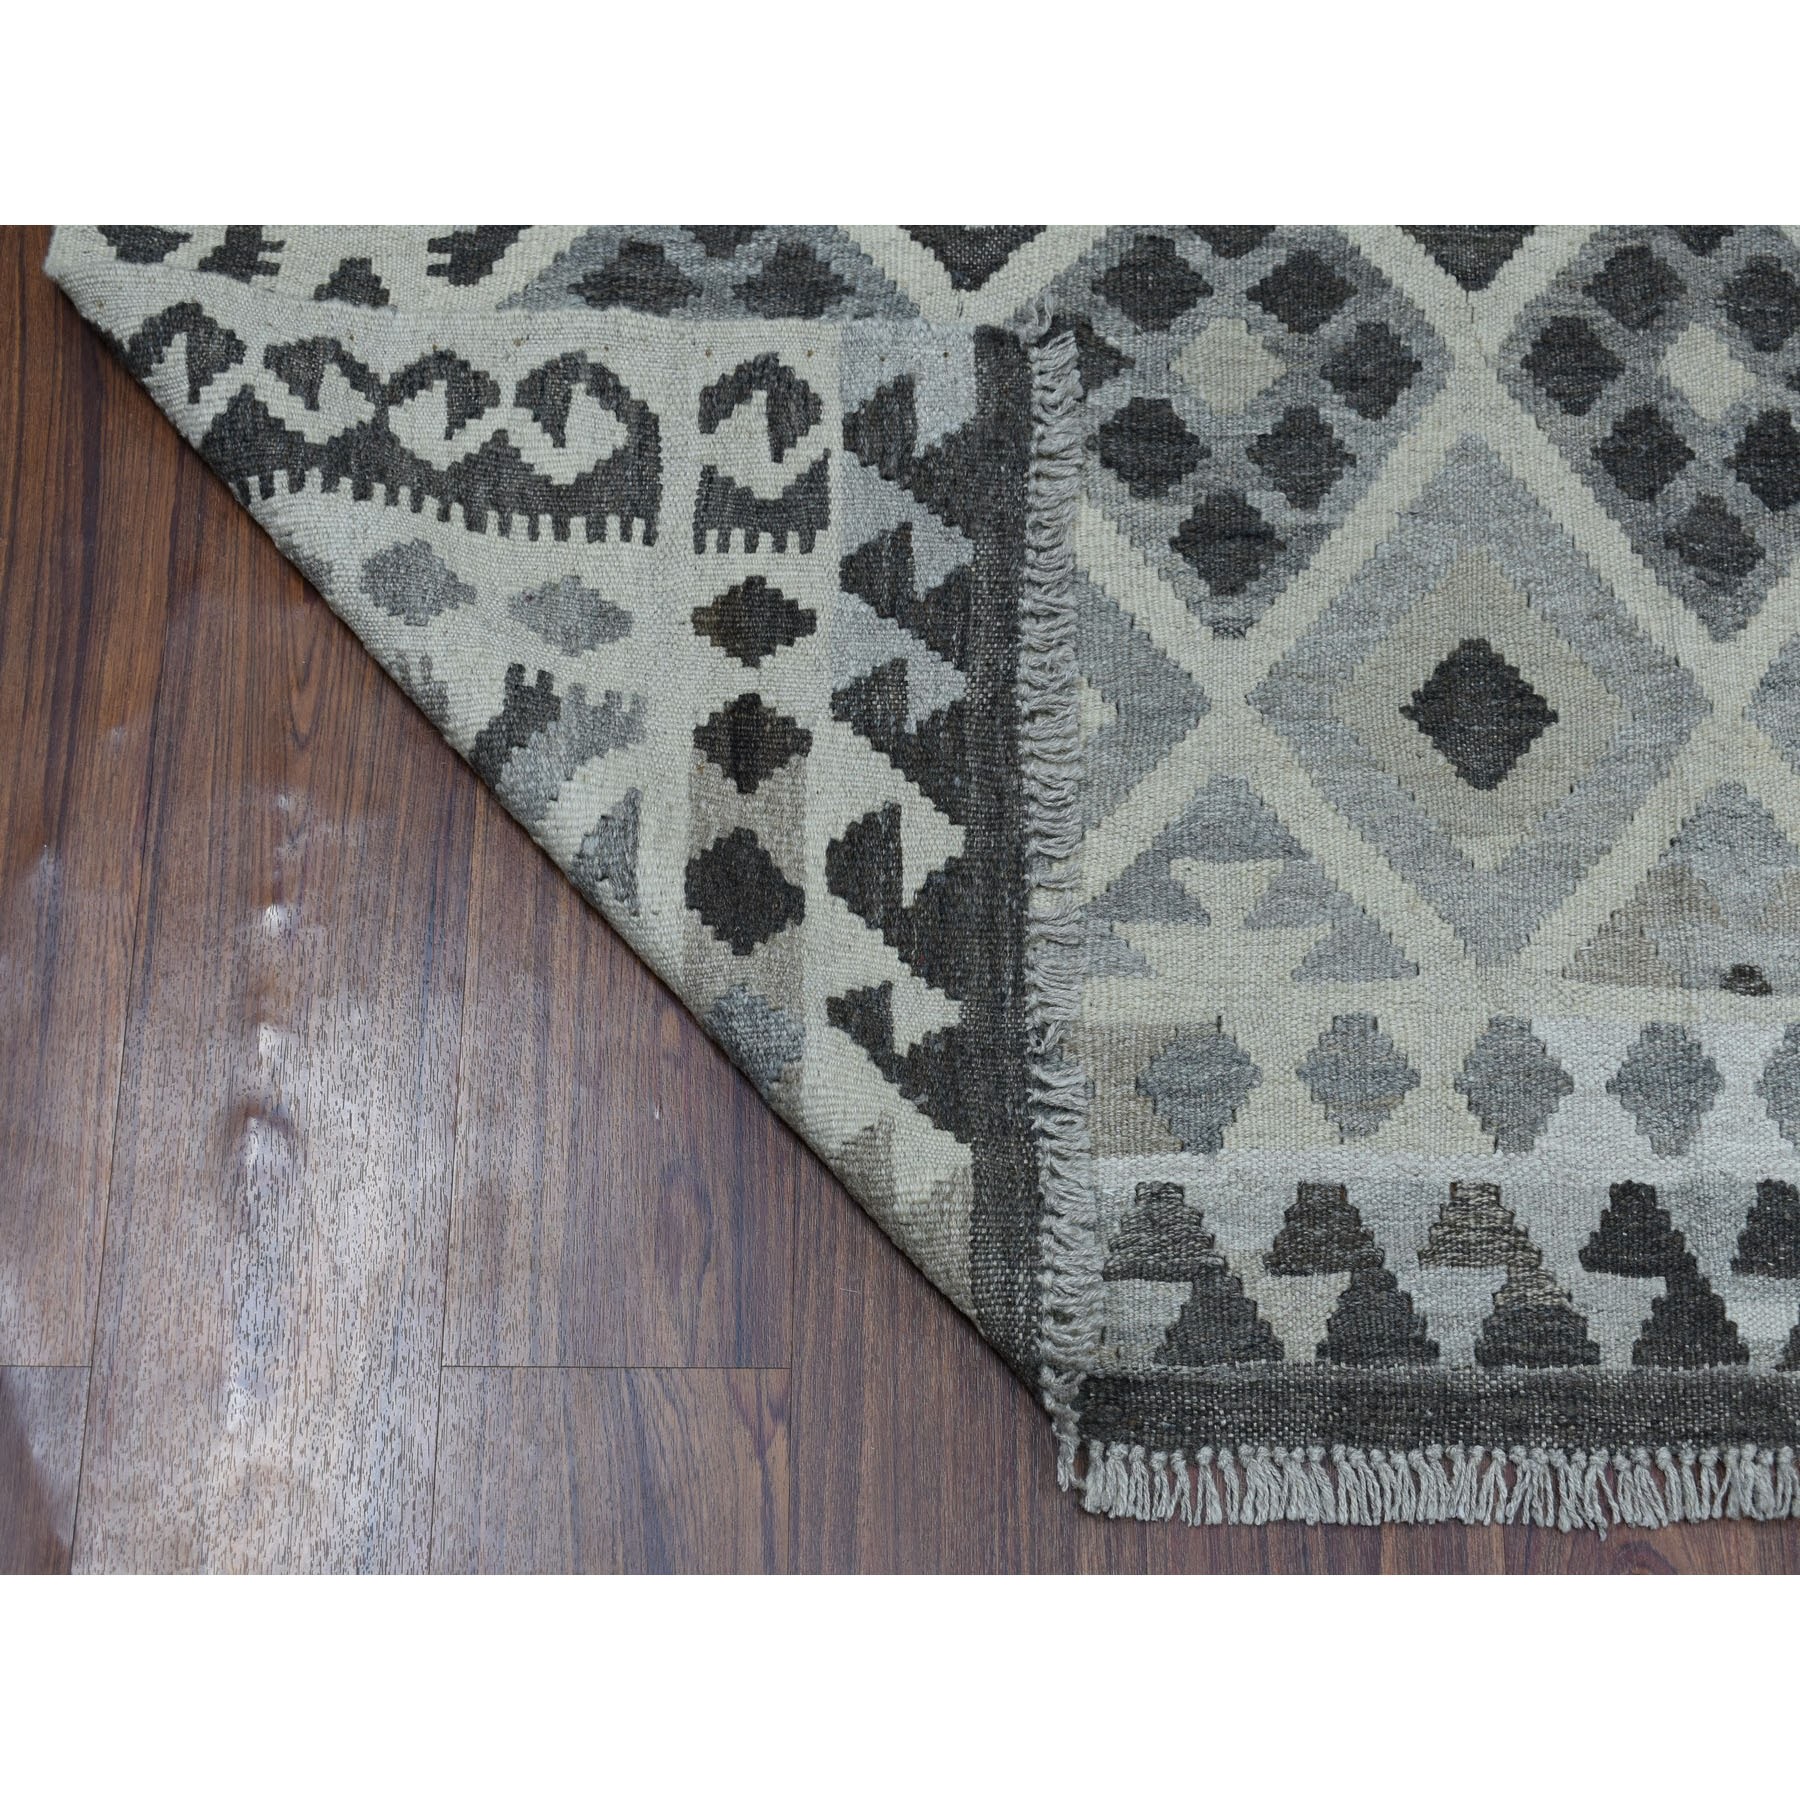 5-2 x6-5  Undyed Natural Wool Afghan Kilim Reversible Hand Woven Oriental Rug 